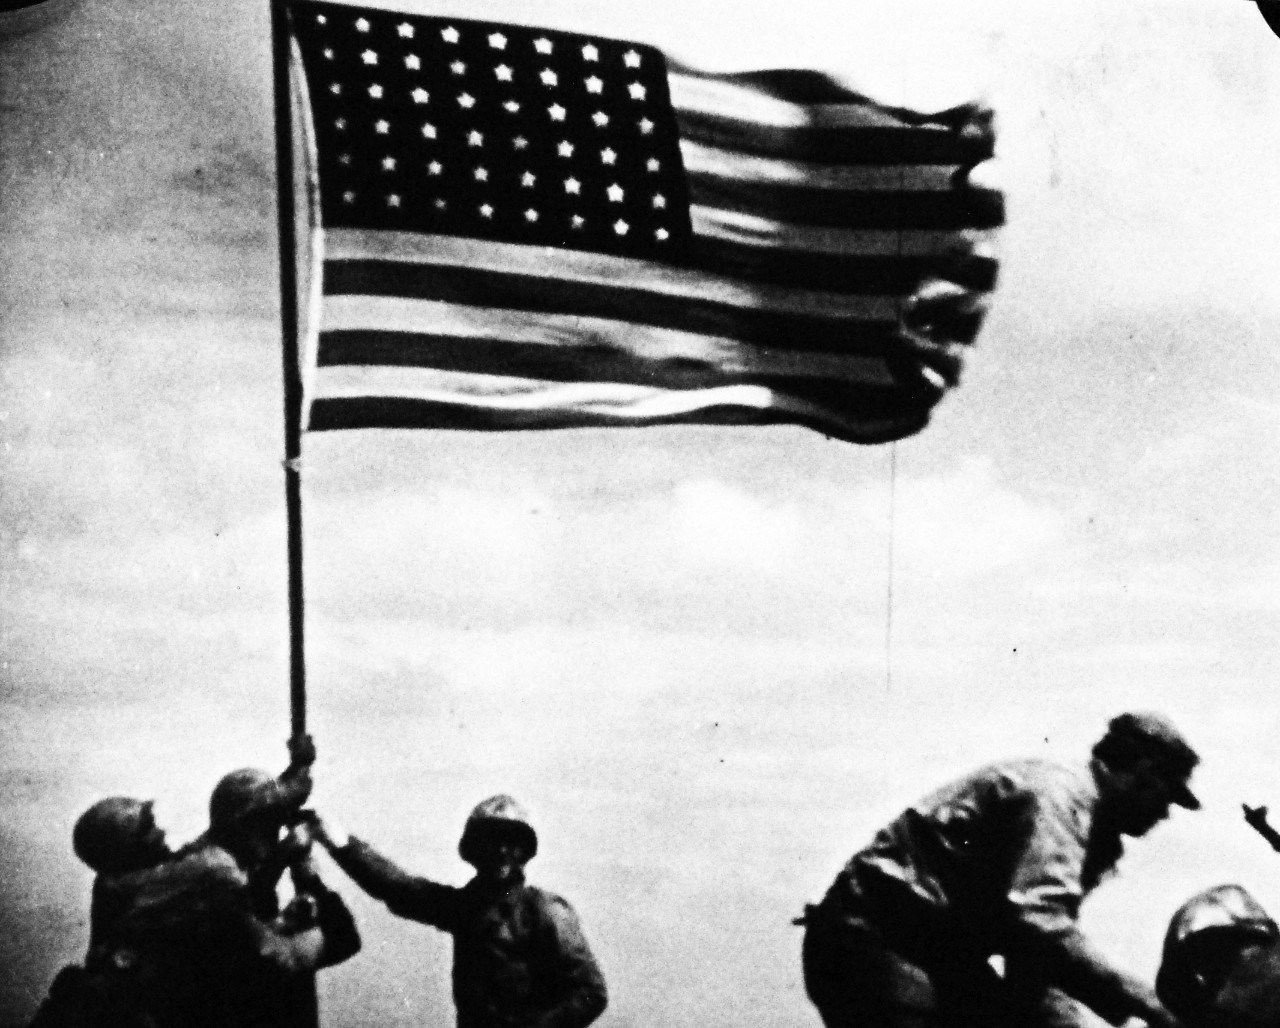 127-GW-319-146247: Iwo Jima Operations, February 1945.  Iwo Jima Flag Raisin on Mt. Suribachi.  Photographed by Dick, copied on October 3, 1946.     Official U.S. Marine Corps Photograph, now in the collections of the National Archives.  (2016/09/06).